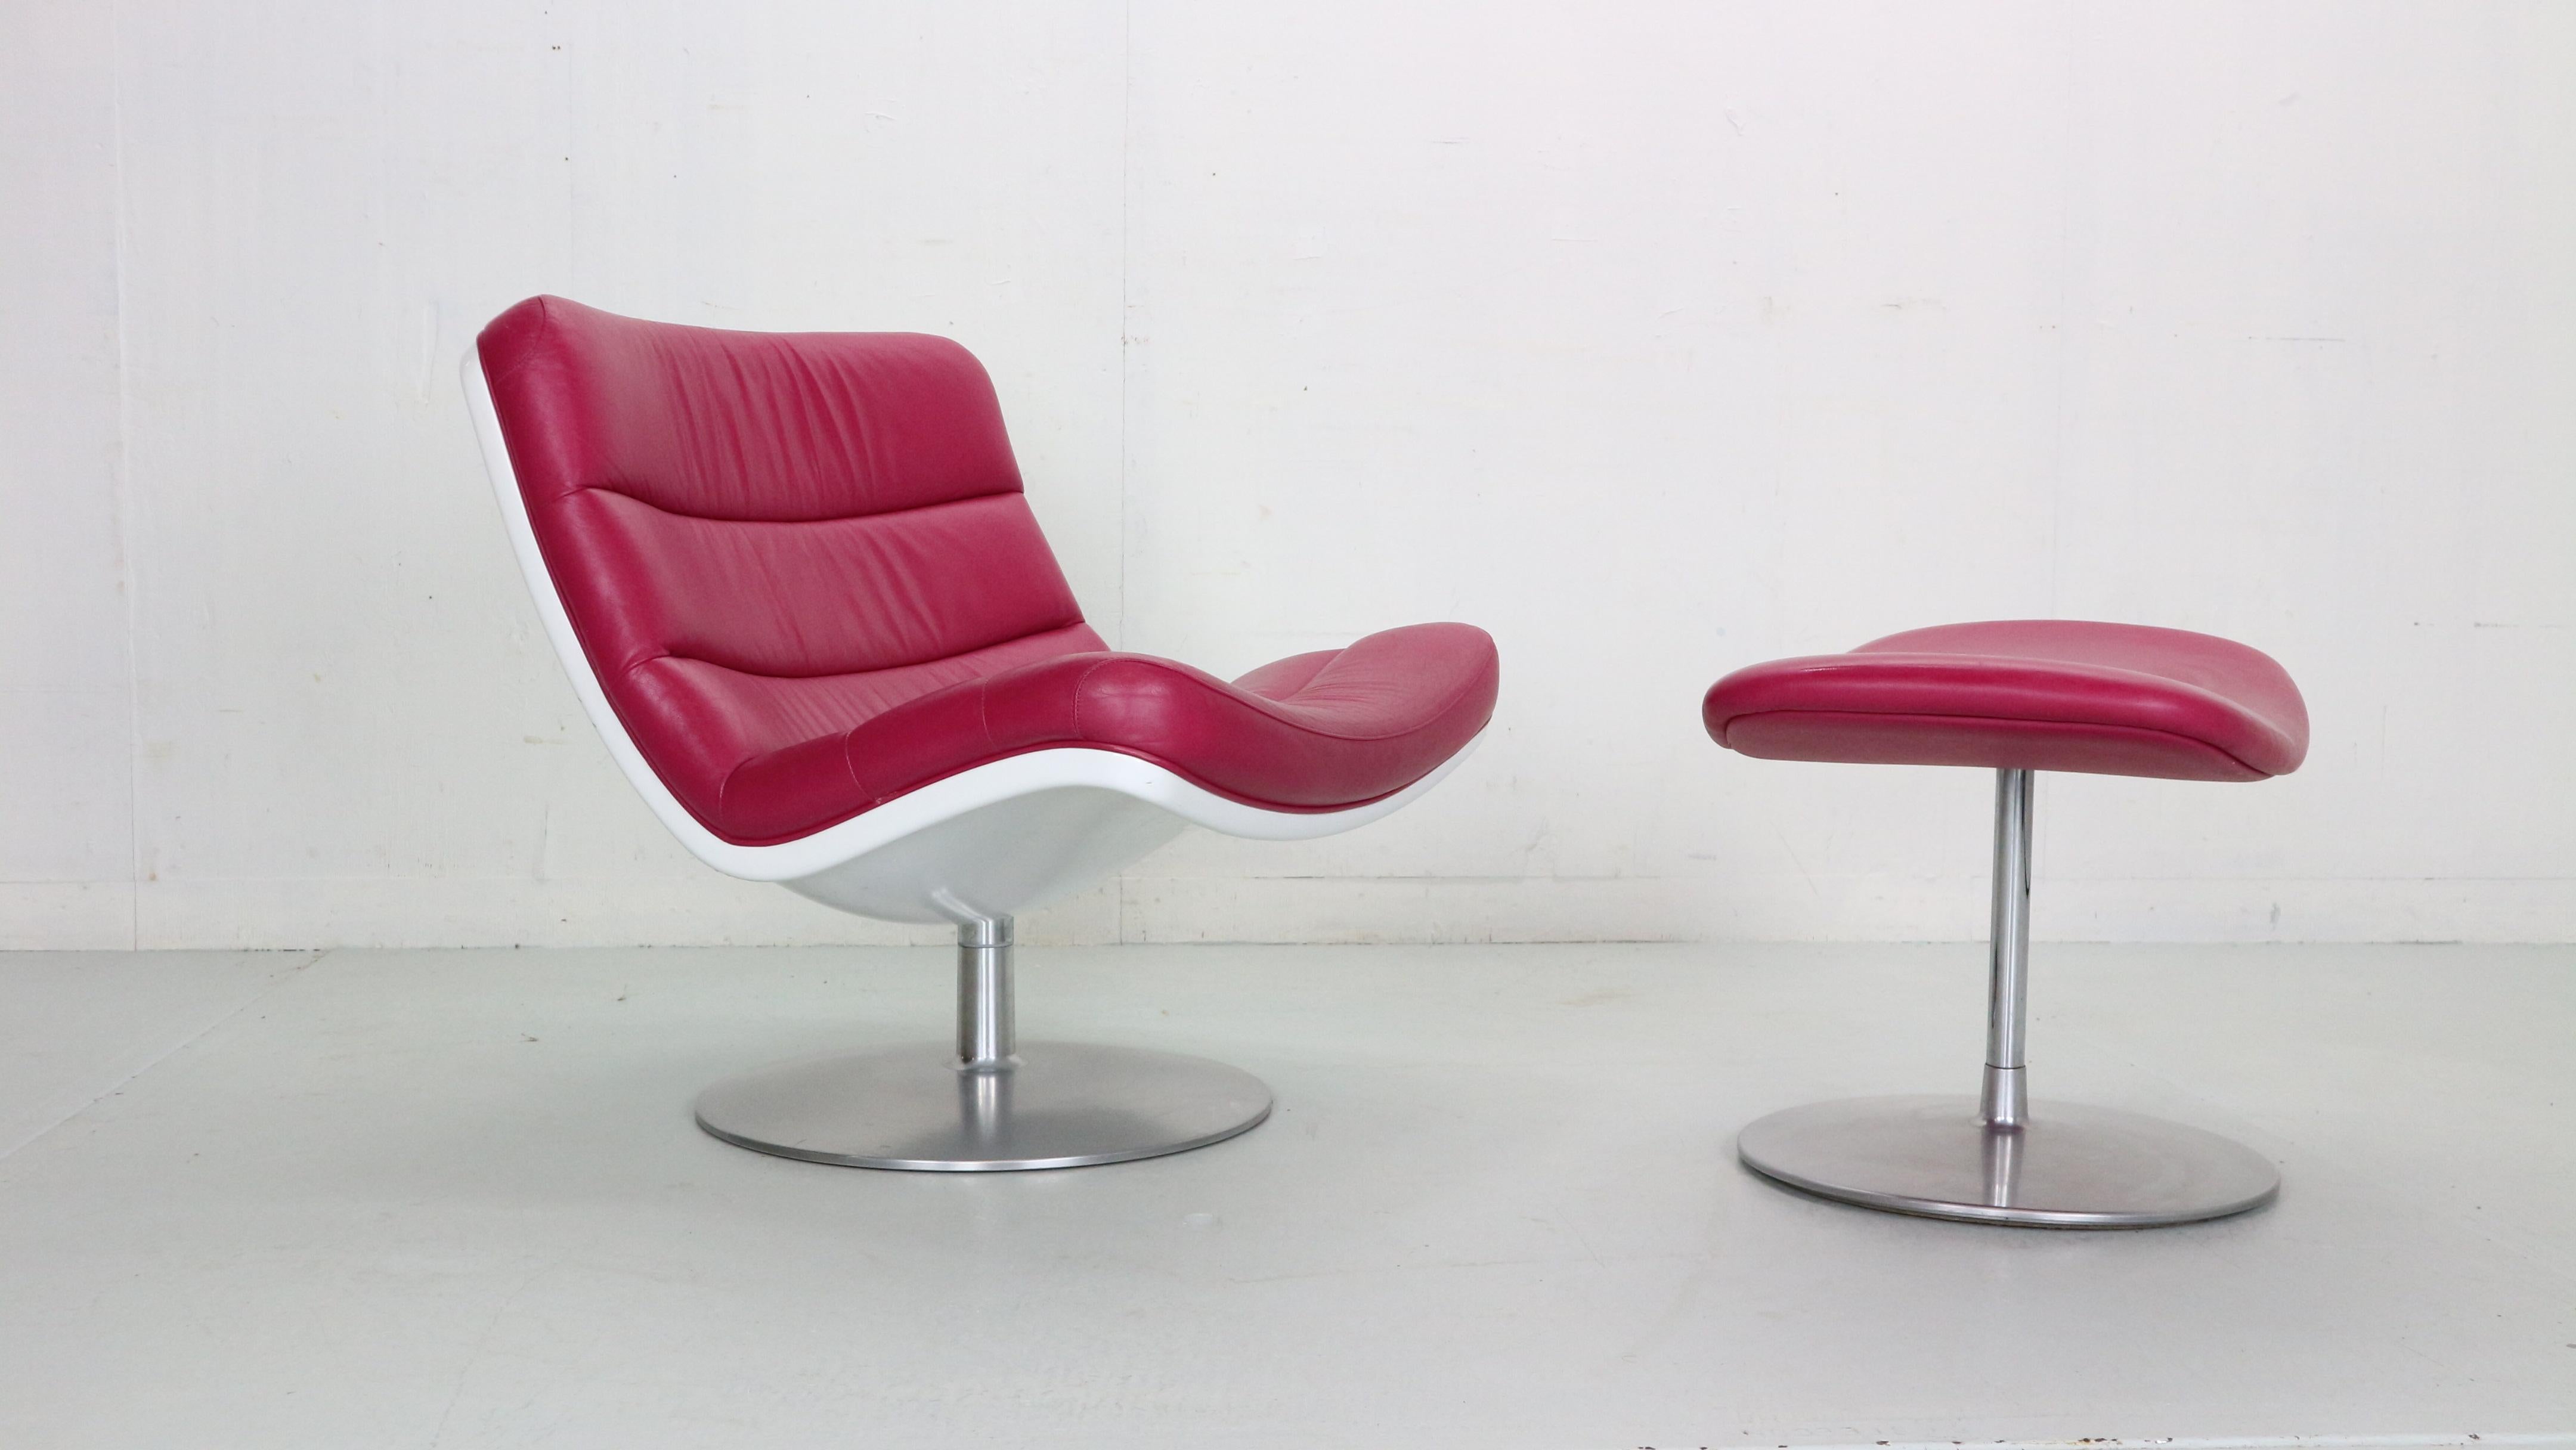 Mid-Century Modern swivel lounge chair designed by Geoffrey Harcourt in 1968 for famous Dutch furniture It was produced by Artifort starting in 2006. 
In 1962 British designer Geoffrey Harcourt (1935) joined the Artifort team, and developed the